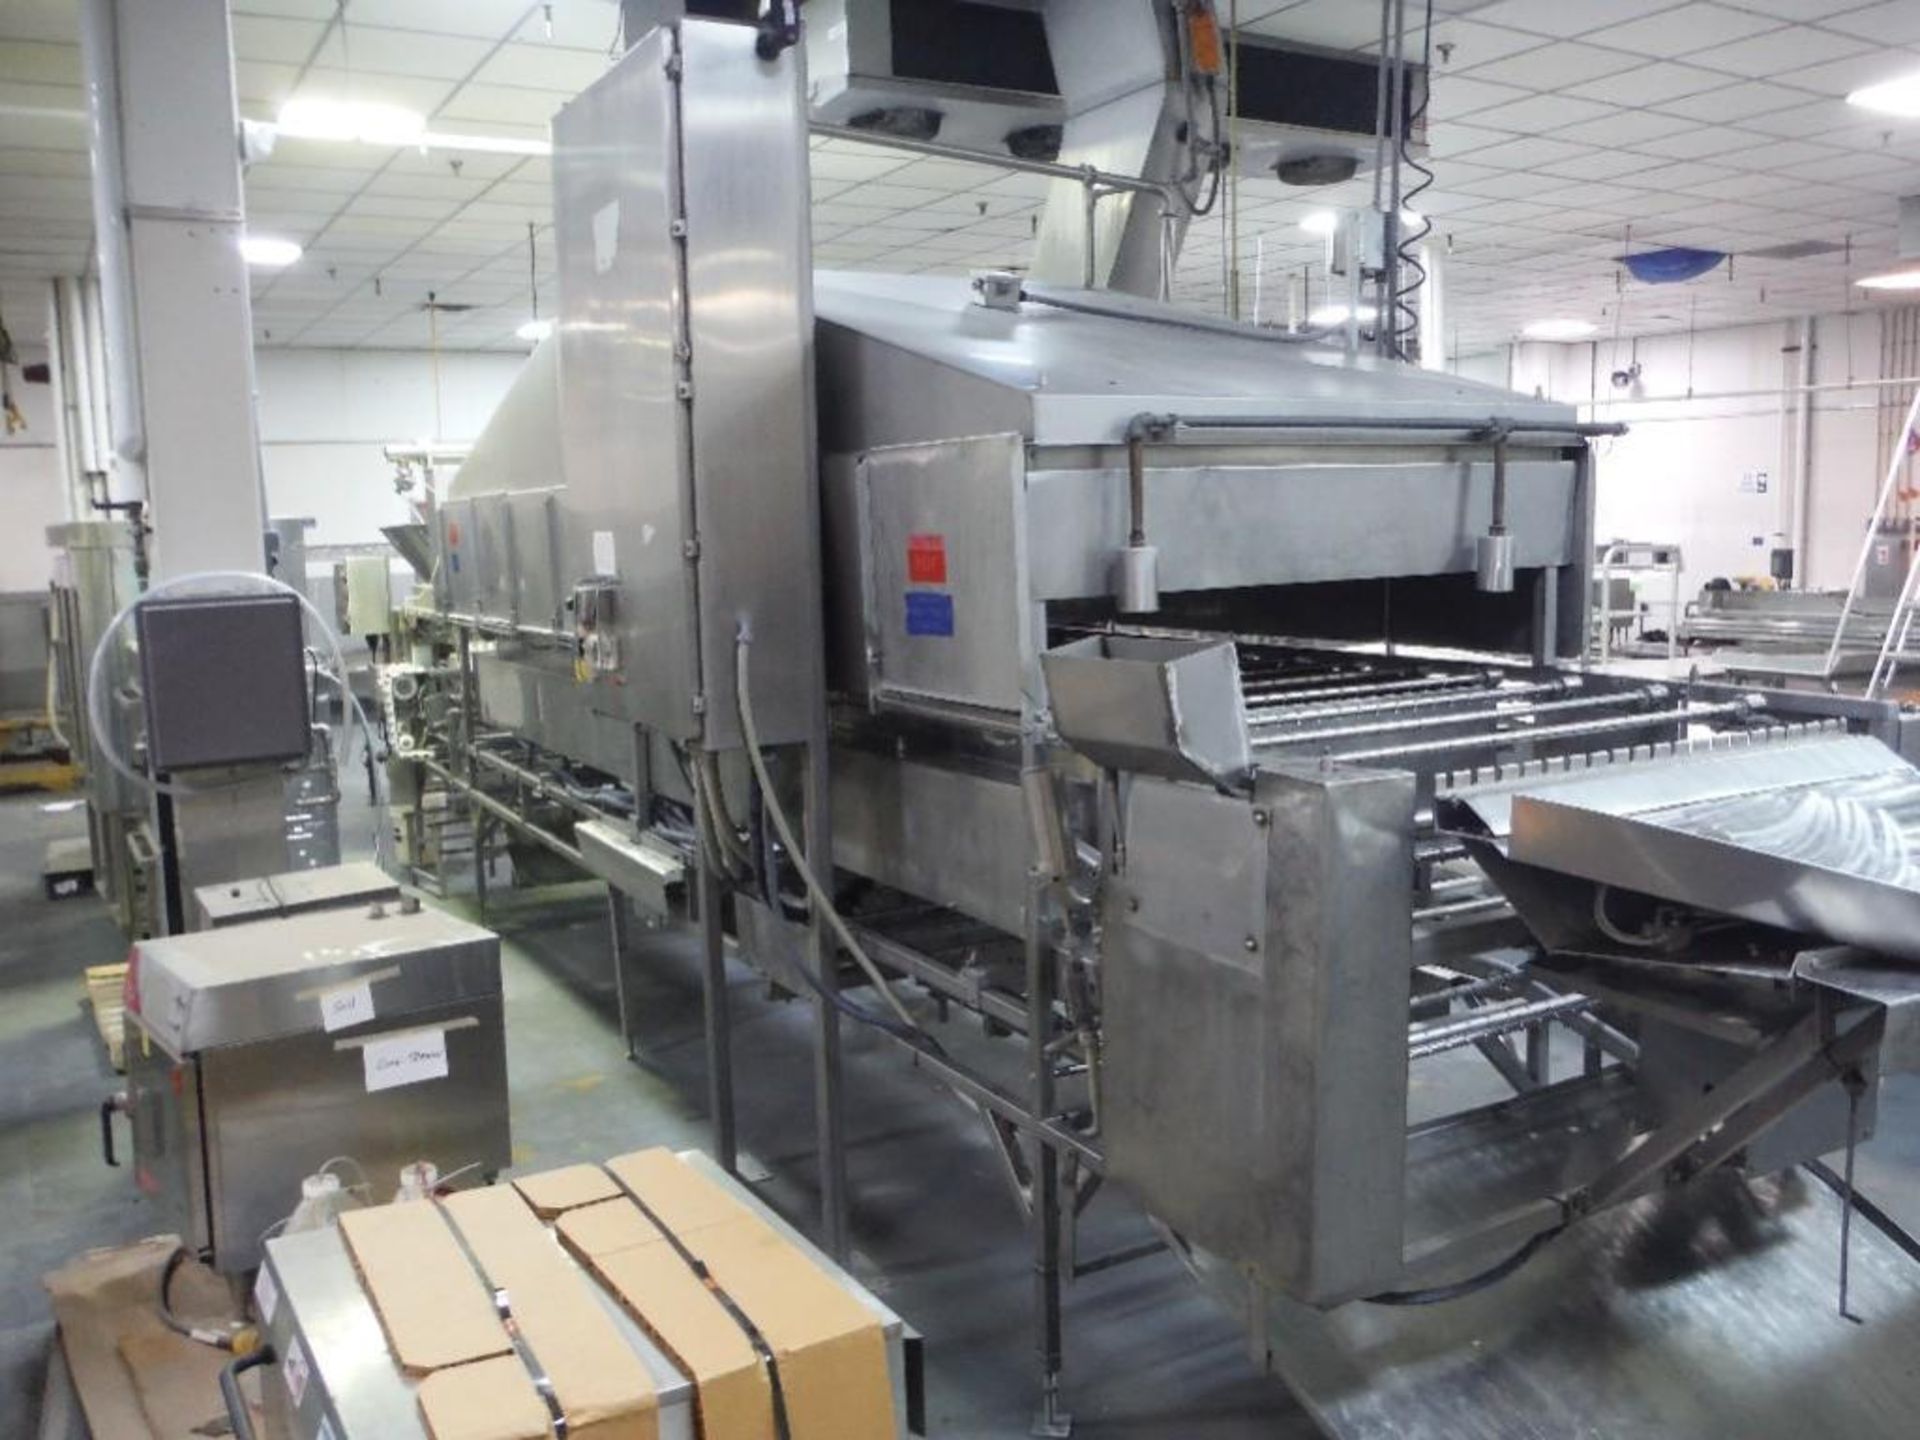 Automated Food Systems electric corndog fryer, Model 200, stick inserter, fryer 192 in. long x 42 in - Image 14 of 22